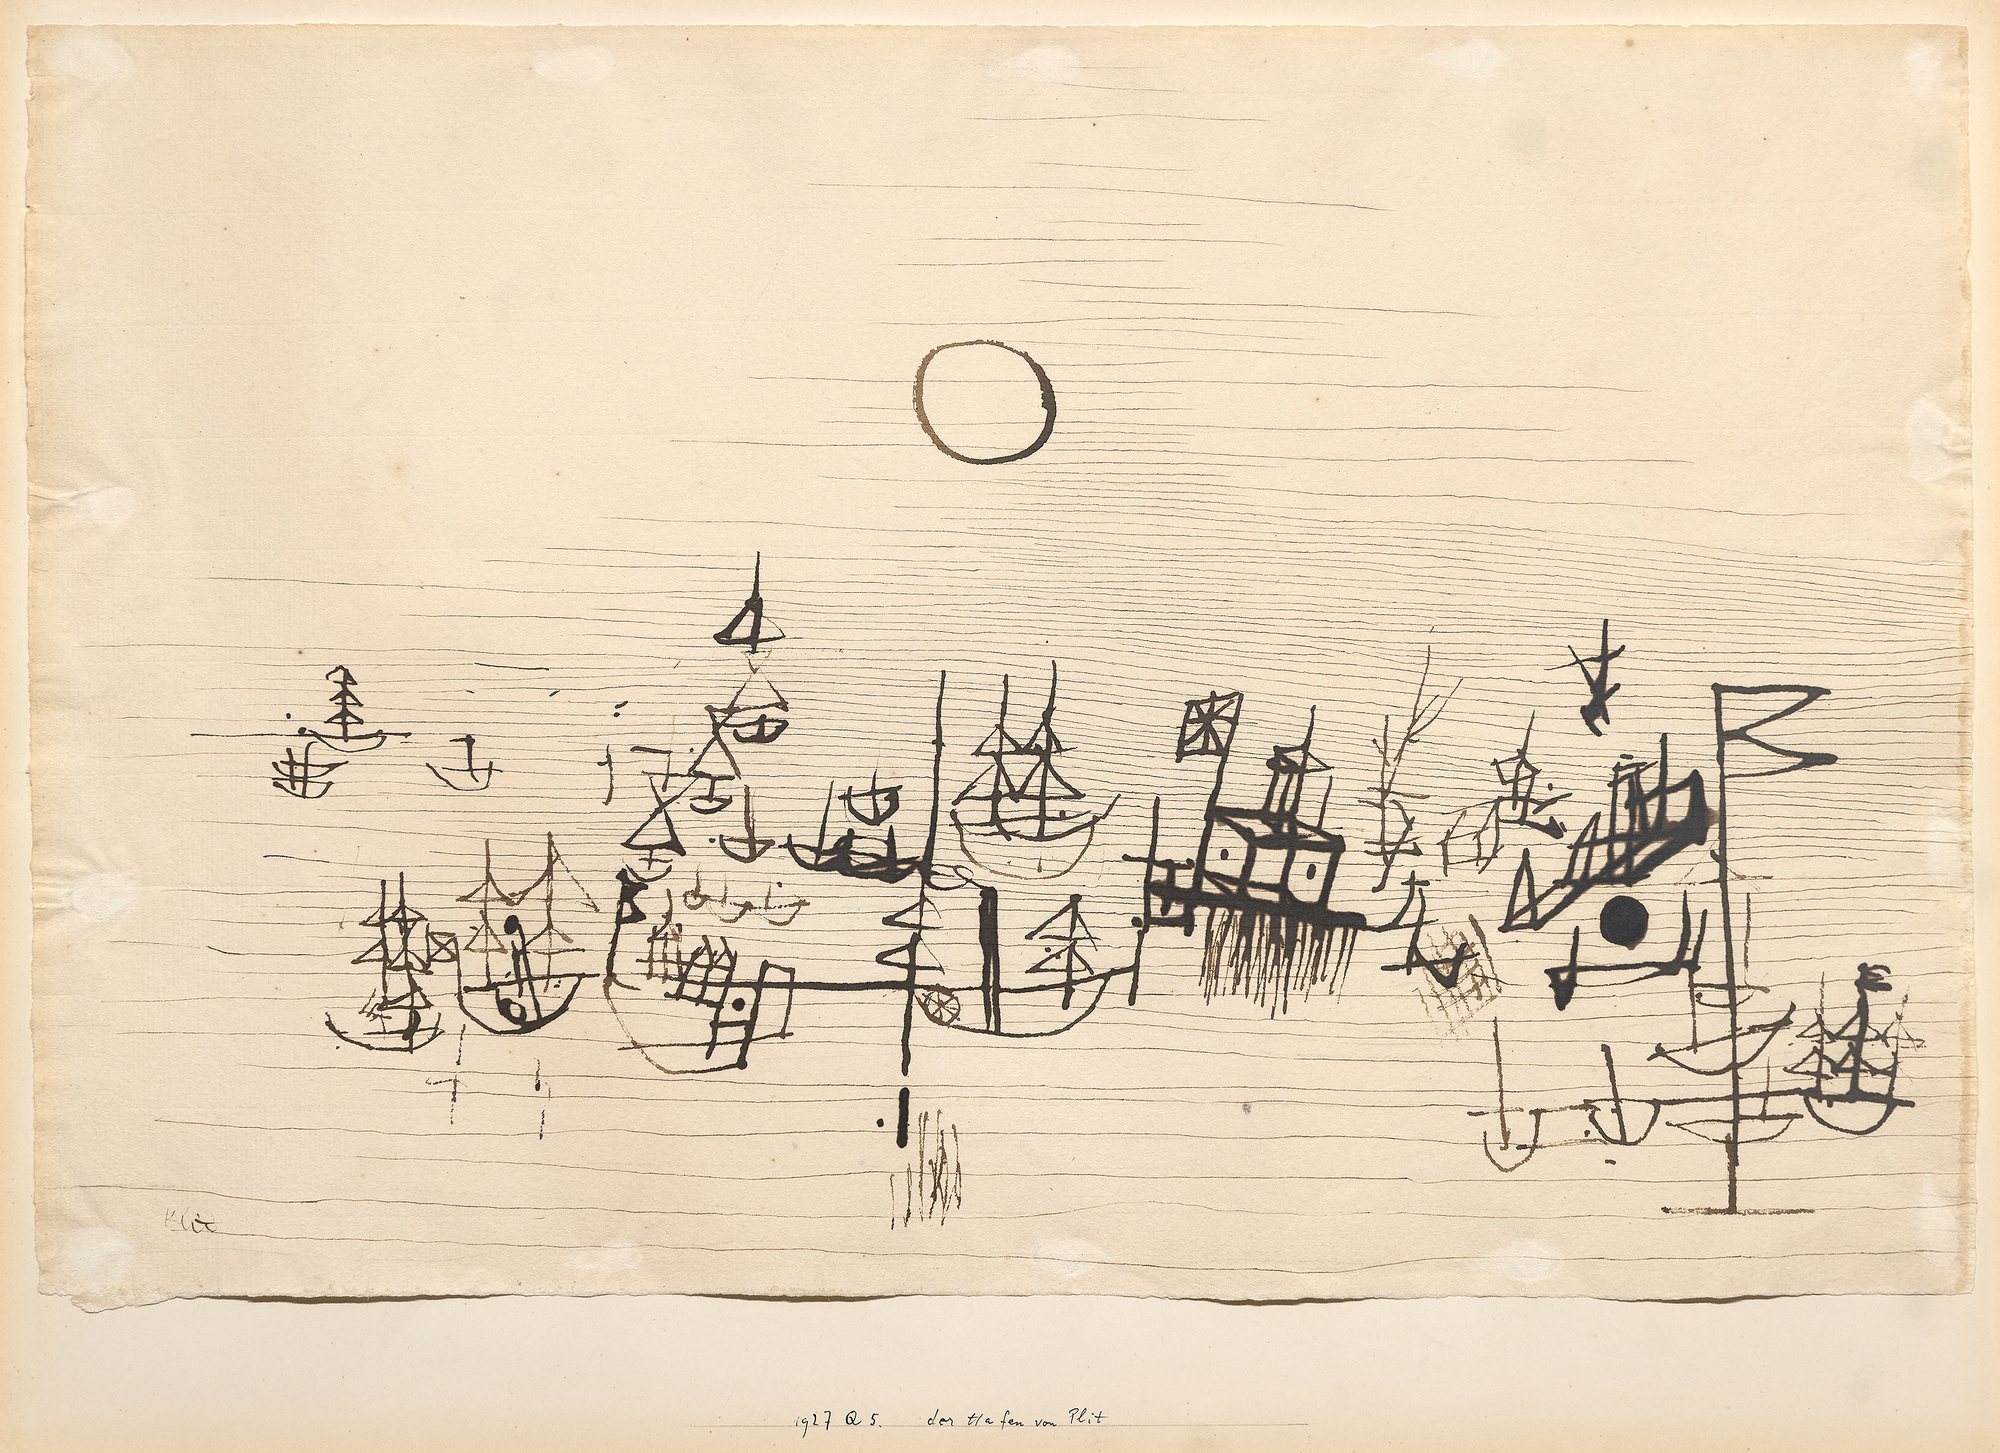 "A drawing is simply a line going for a walk."<br>-Paul Klee<br><br>A significant draftsman, Paul Klee's works on paper rival his works on canvas in their technical proficiency and attention to his modern aesthetic.  As an early teacher at the Bauhaus school, Klee traveled extensively and inspired a generation of 20th Century Artists.  <br><br>Klee transcended a particular style, instead creating his own unique visual vocabulary.  In Klee's work, we see a return to basic, geometric forms and a removal of artistic embellishment.  "Der Hafen von Plit" was once owned by Alfred H. Barr, Jr., the First Director of the Museum of Modern Art, New York.